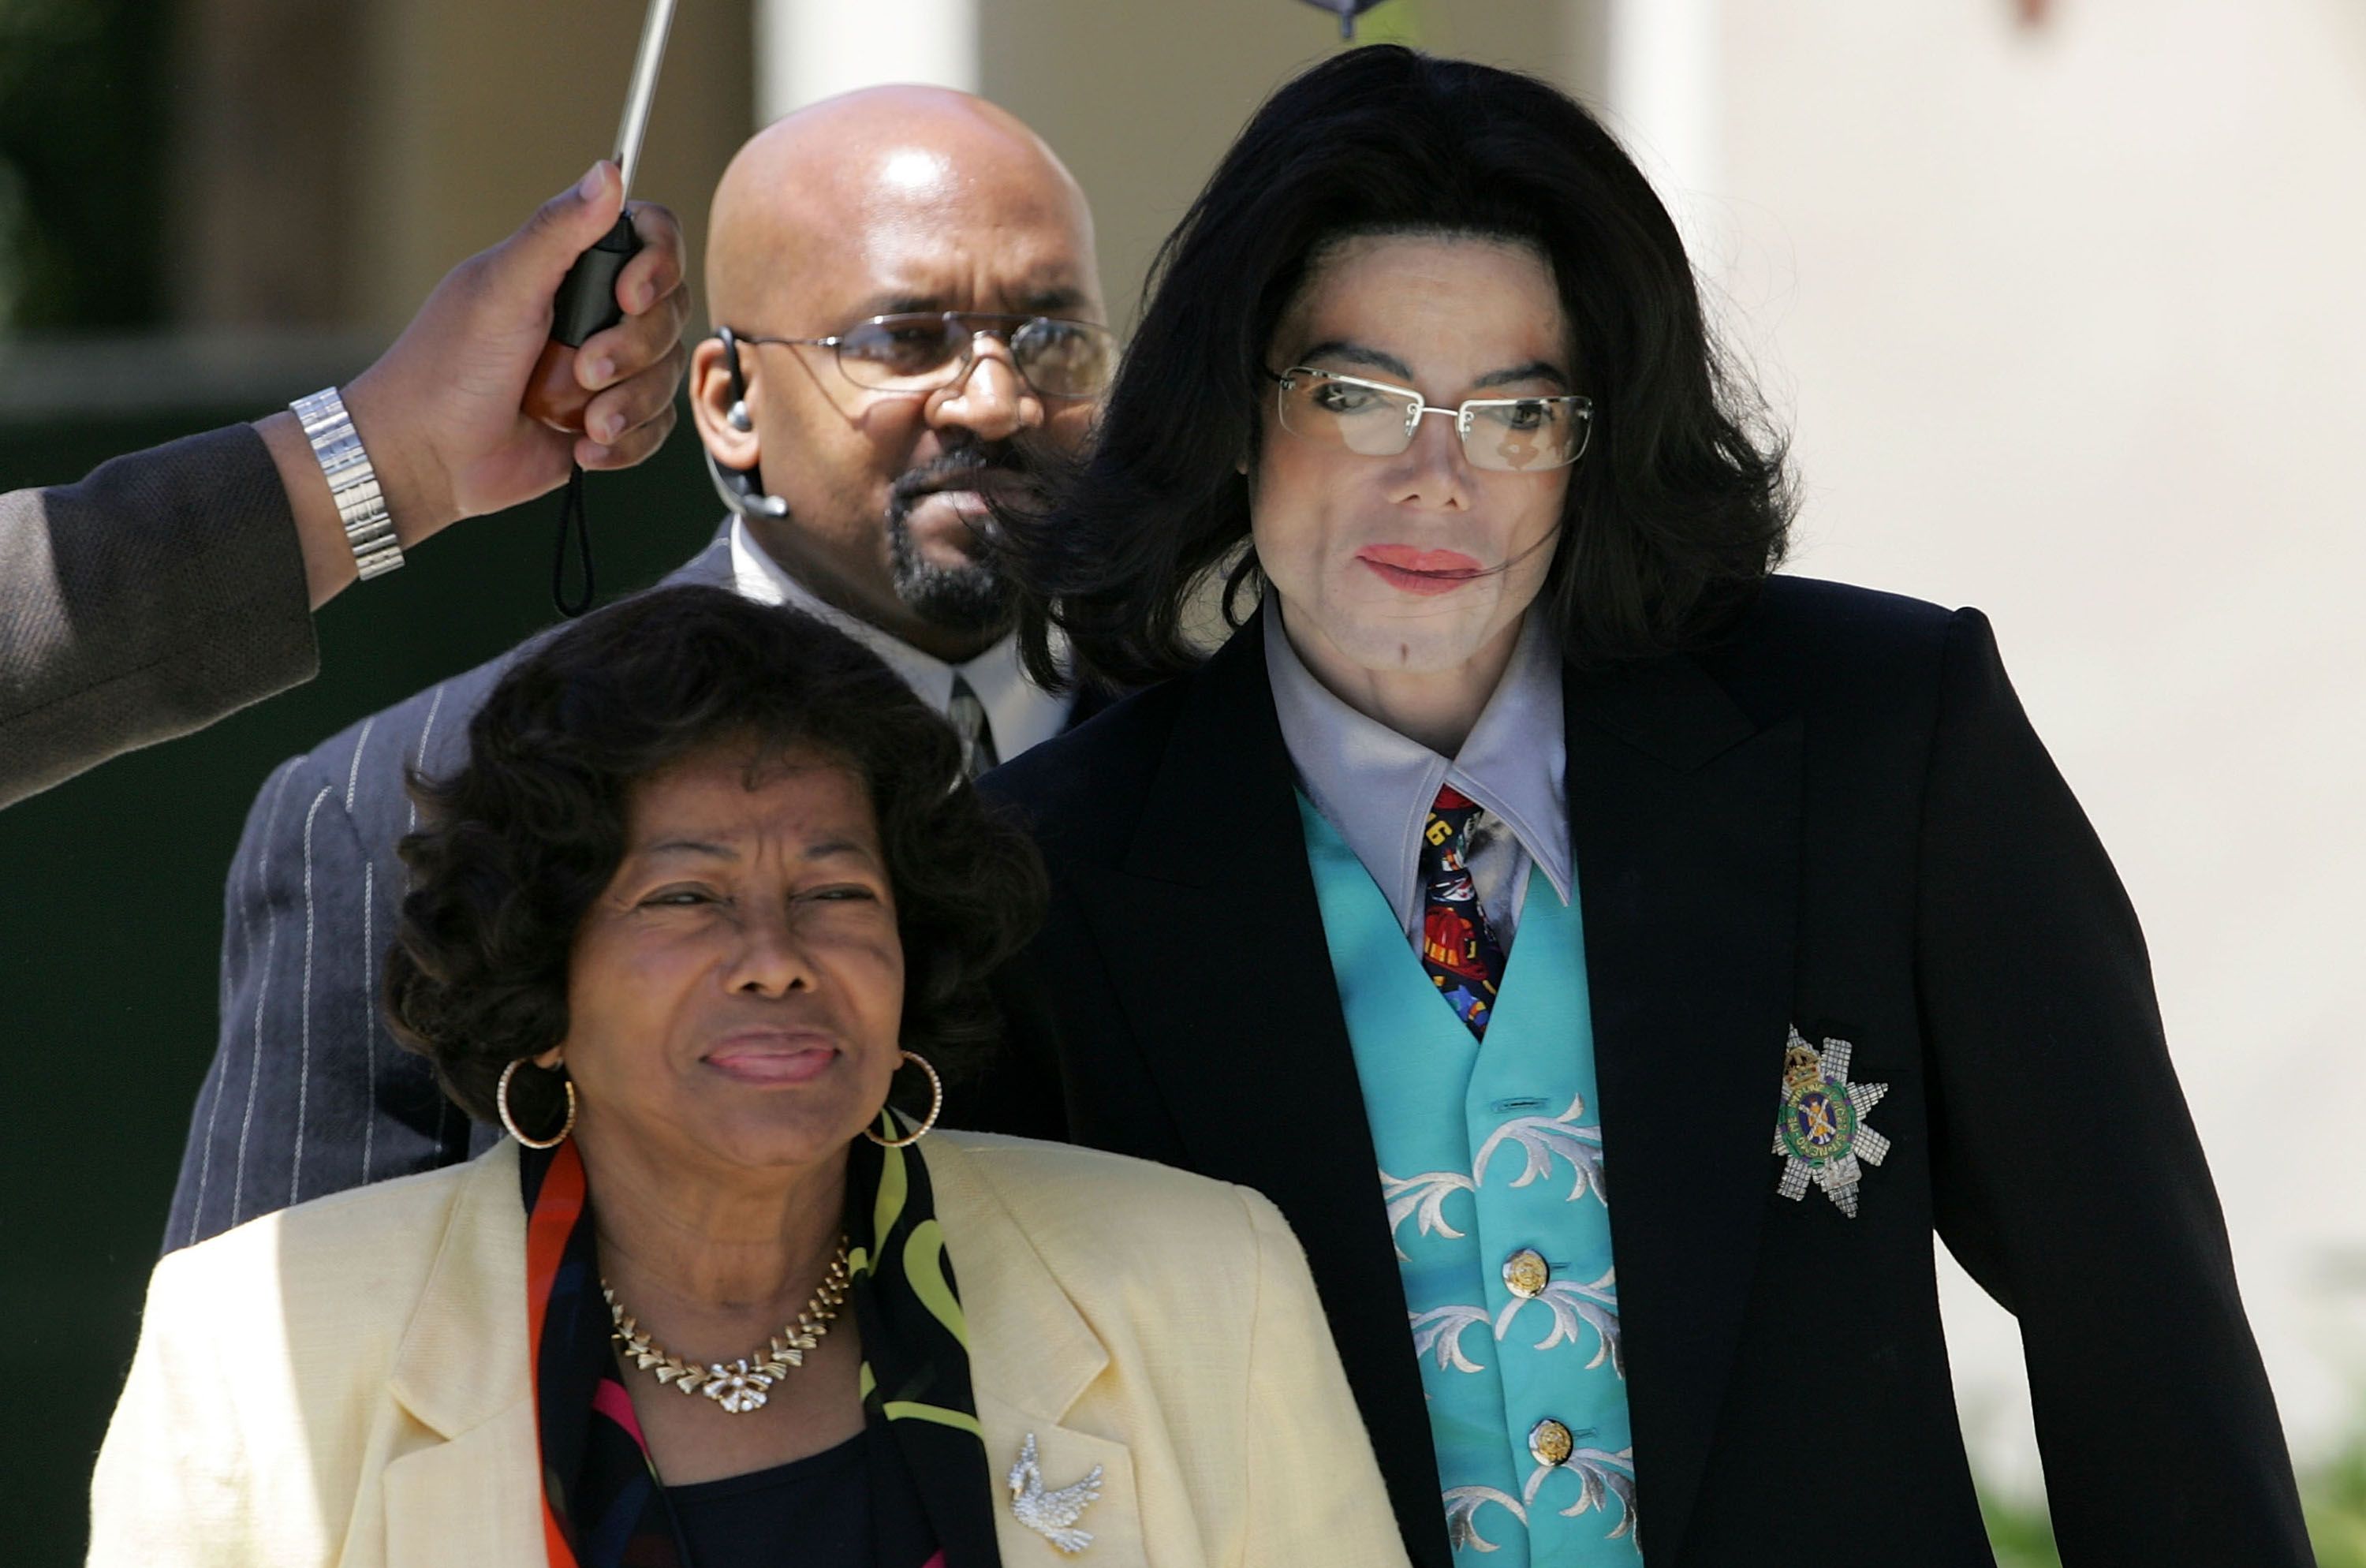 Michael Jackson at the Santa Barbara County Courthouse with his mother Katherine Jackson for the proceedings in his child molestation trial in 2005 | Source: Getty Images 